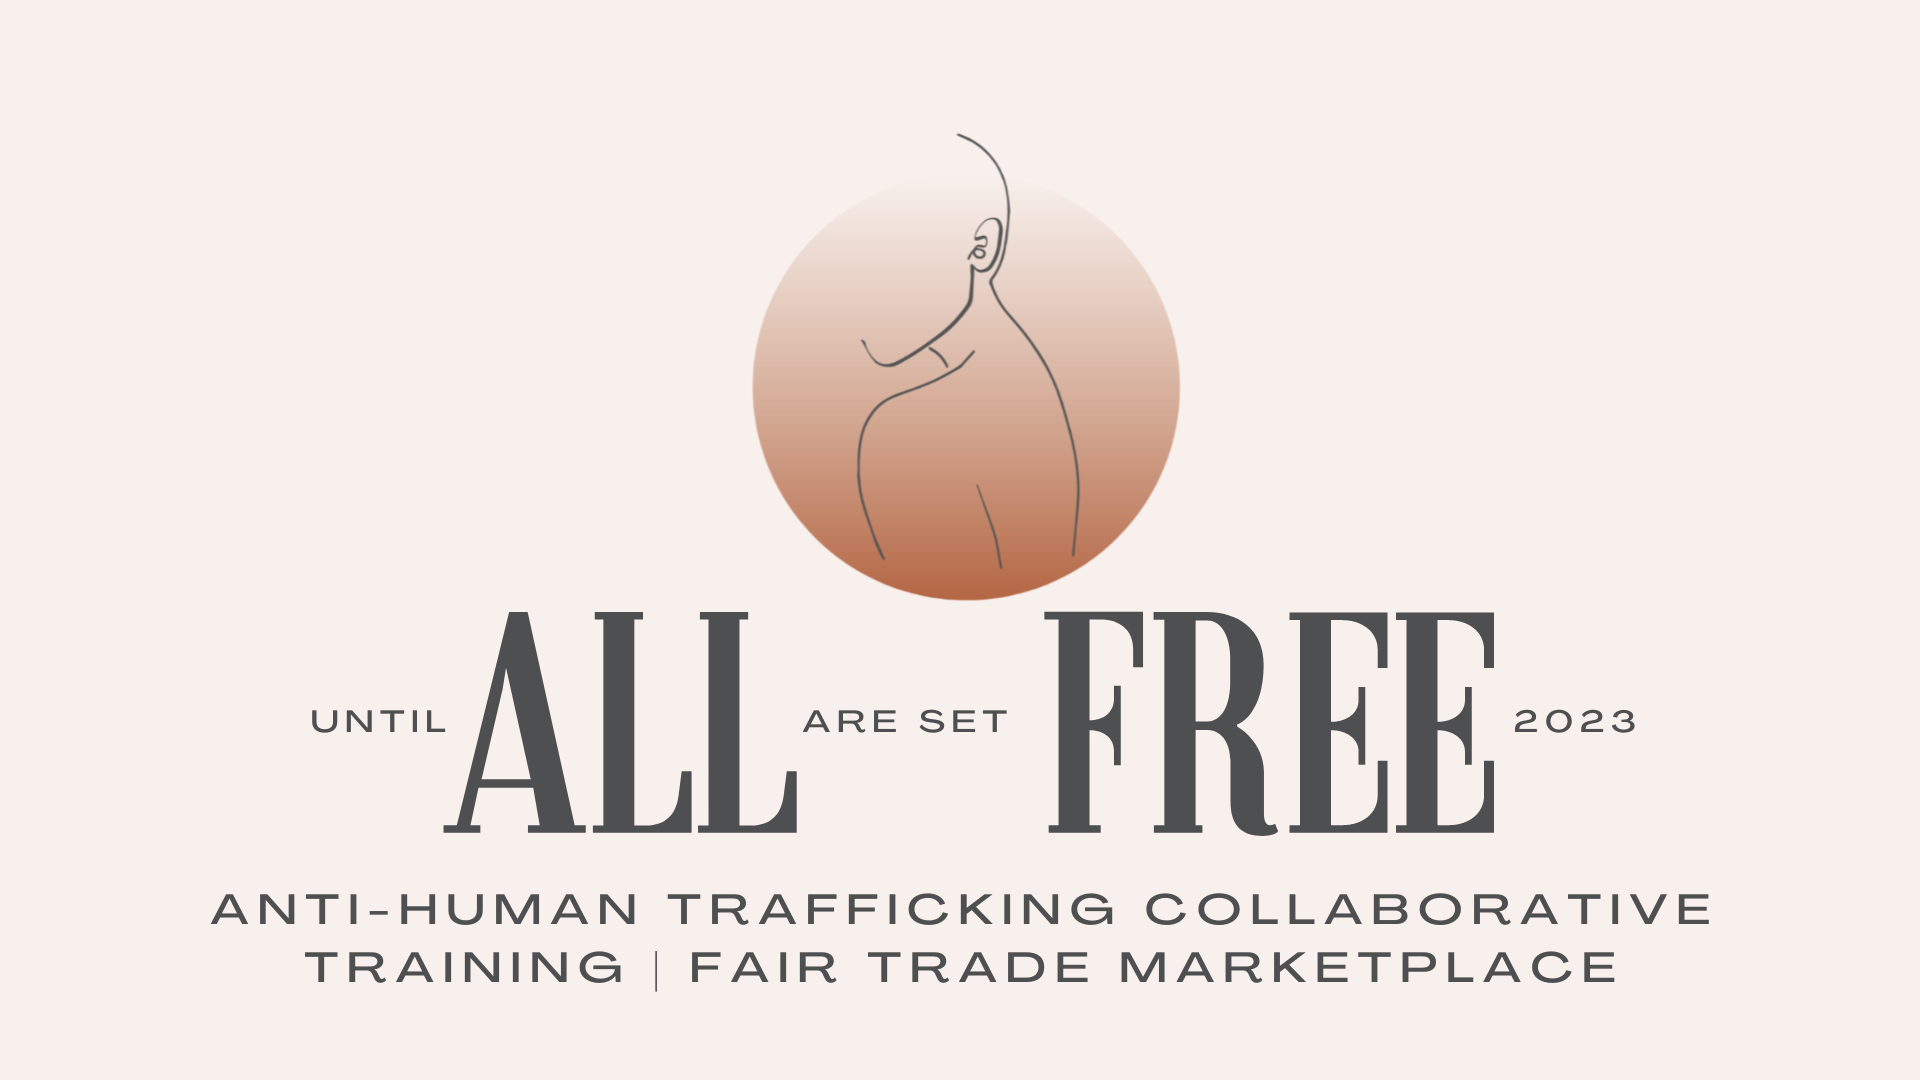 Anti-Human Trafficking Training & Collaboration: Until All Are Set Free